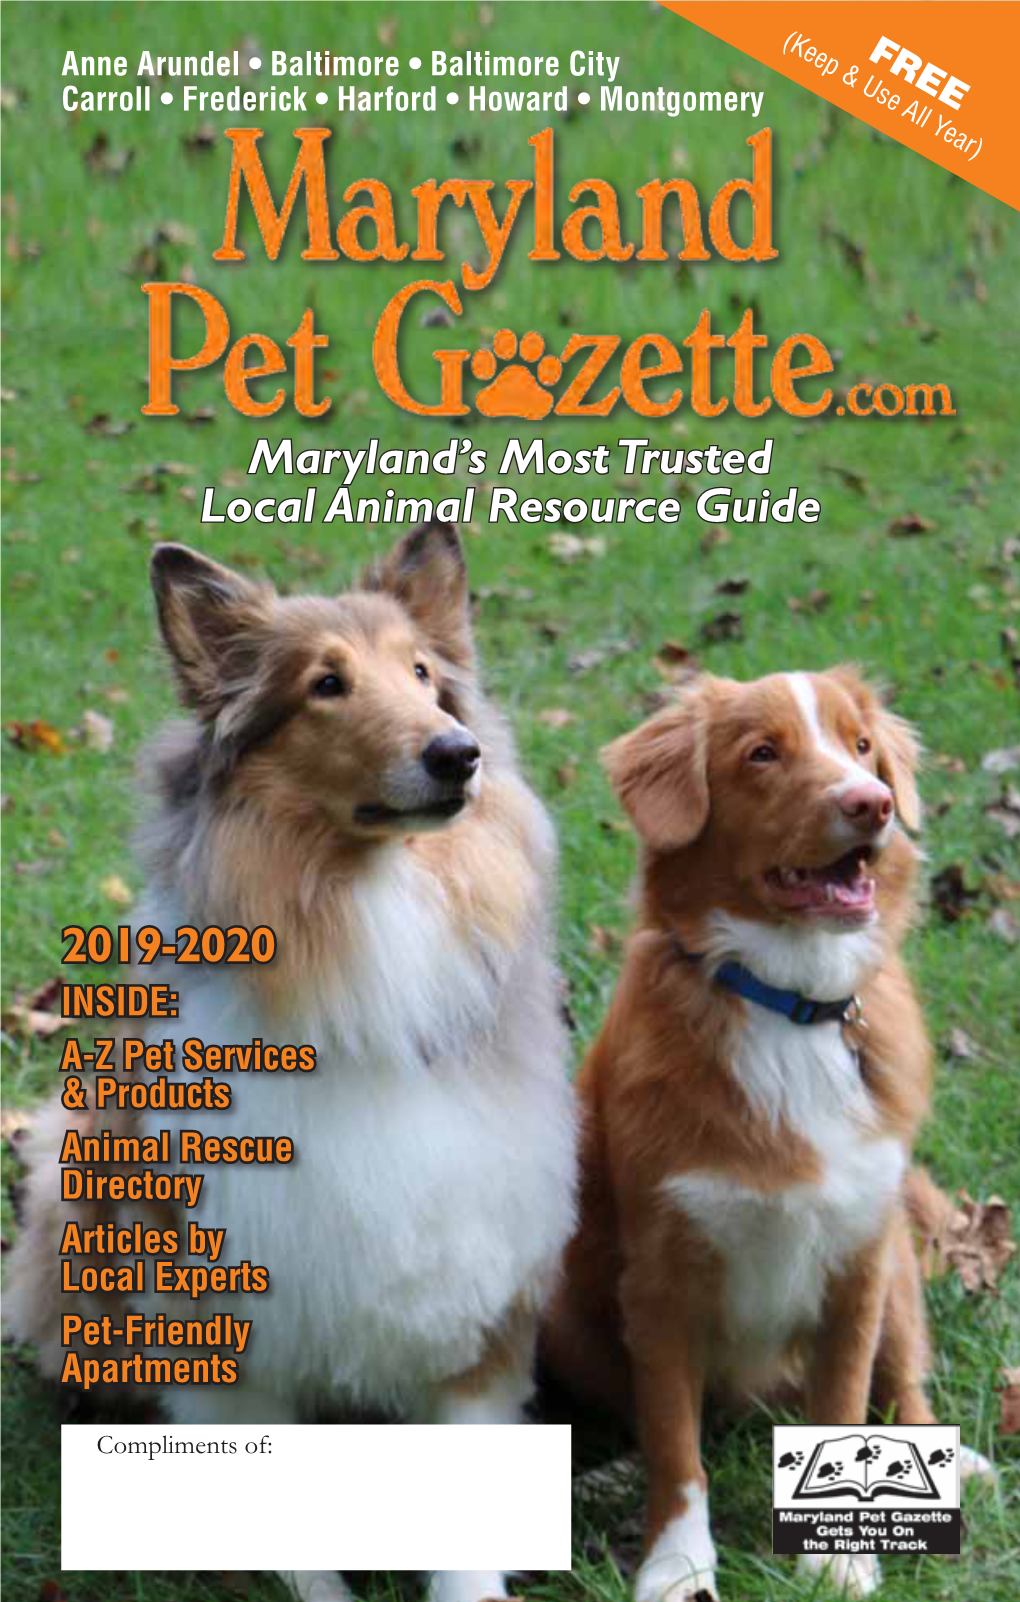 2019-2020 Maryland's Most Trusted Local Animal Resource Guide